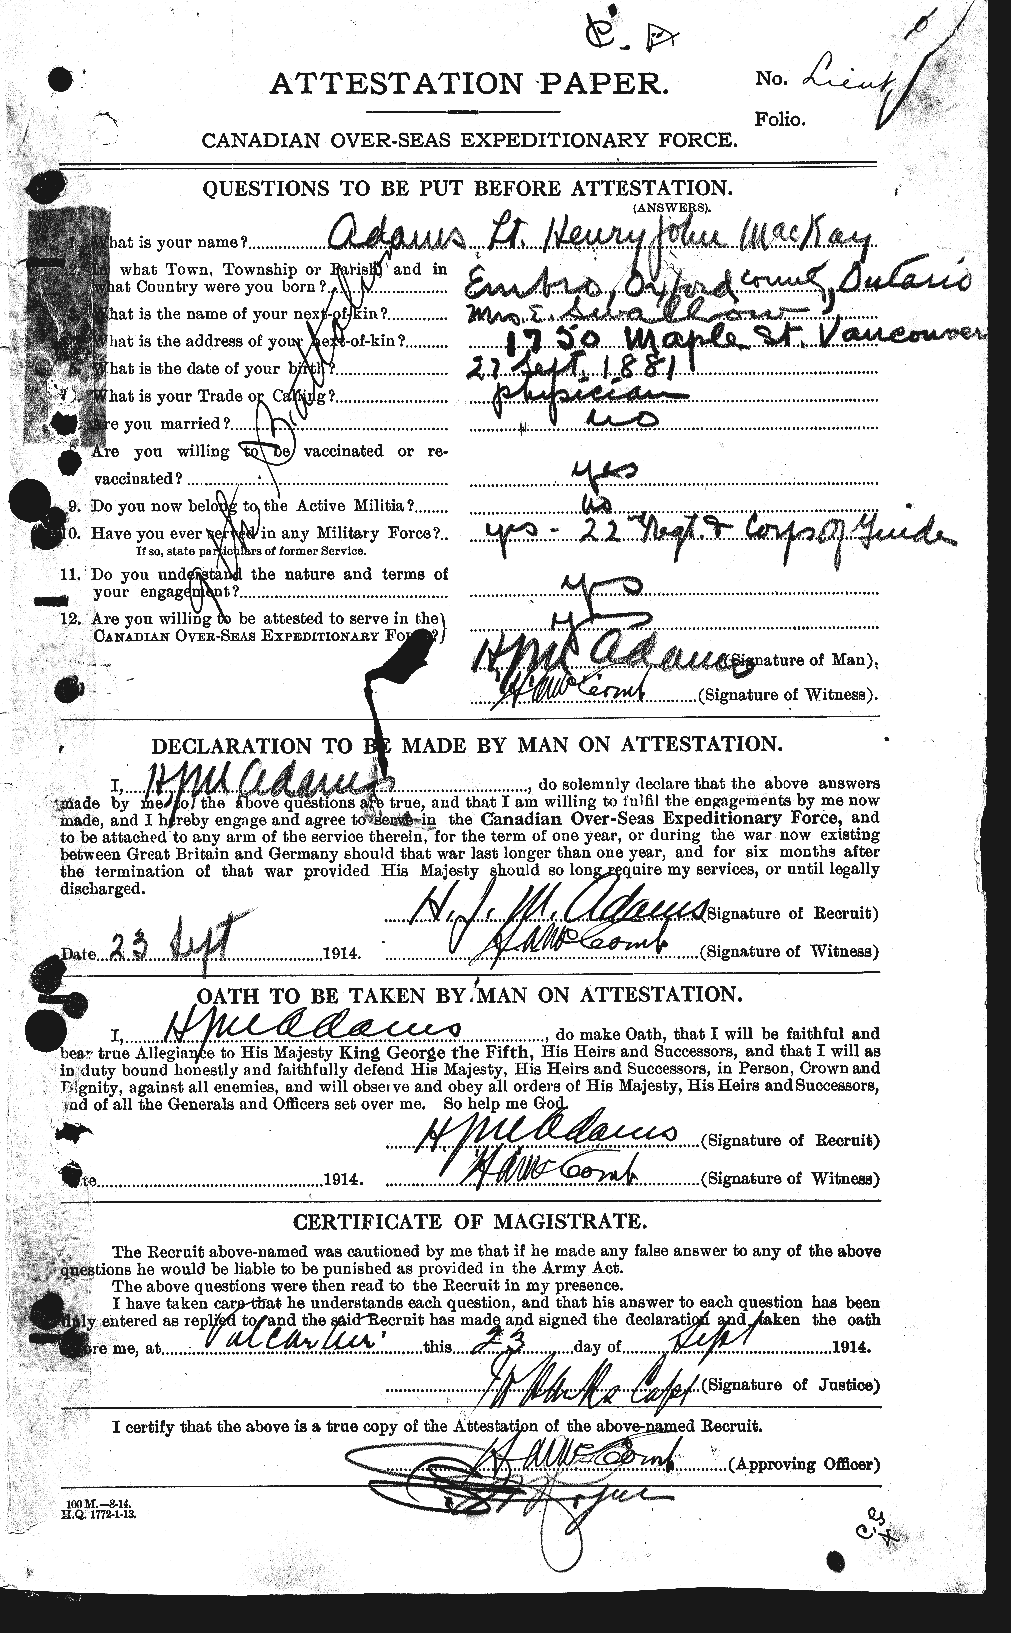 Personnel Records of the First World War - CEF 203190a